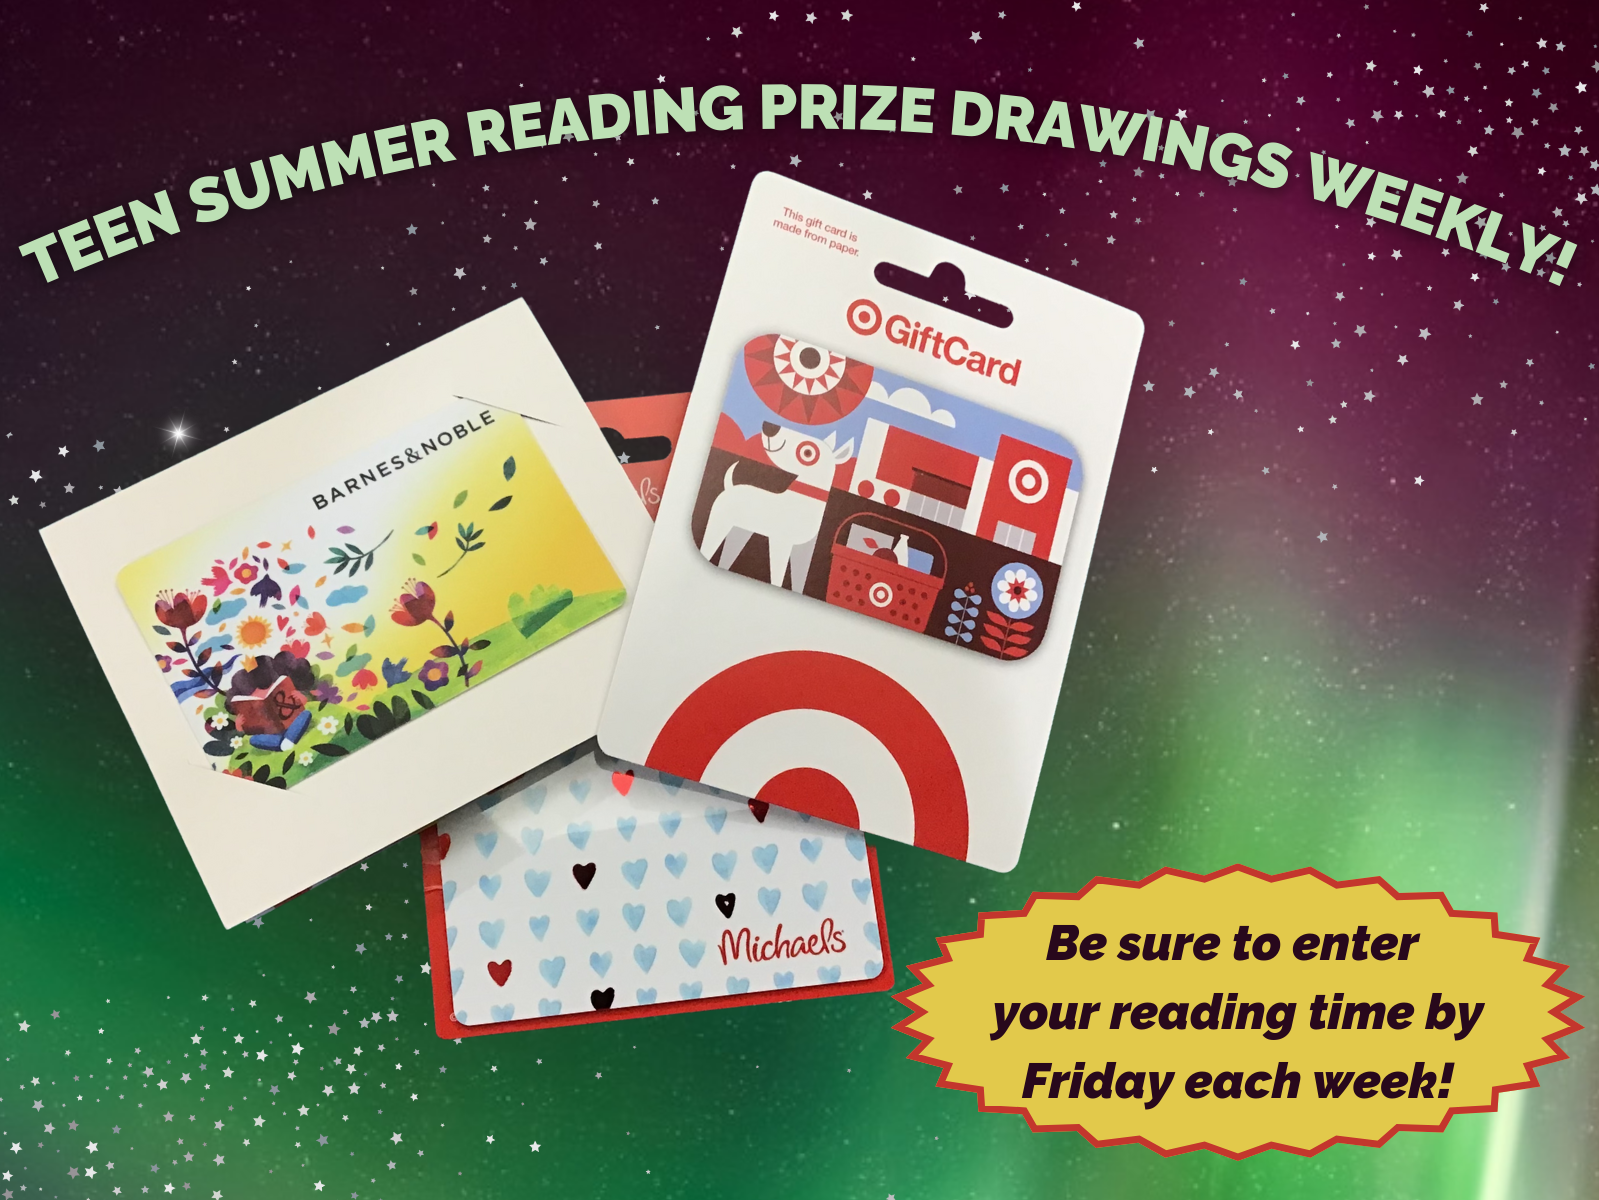 Teen Summer Reading Weekly Raffle Prizes for Bedford Public Library cardholders